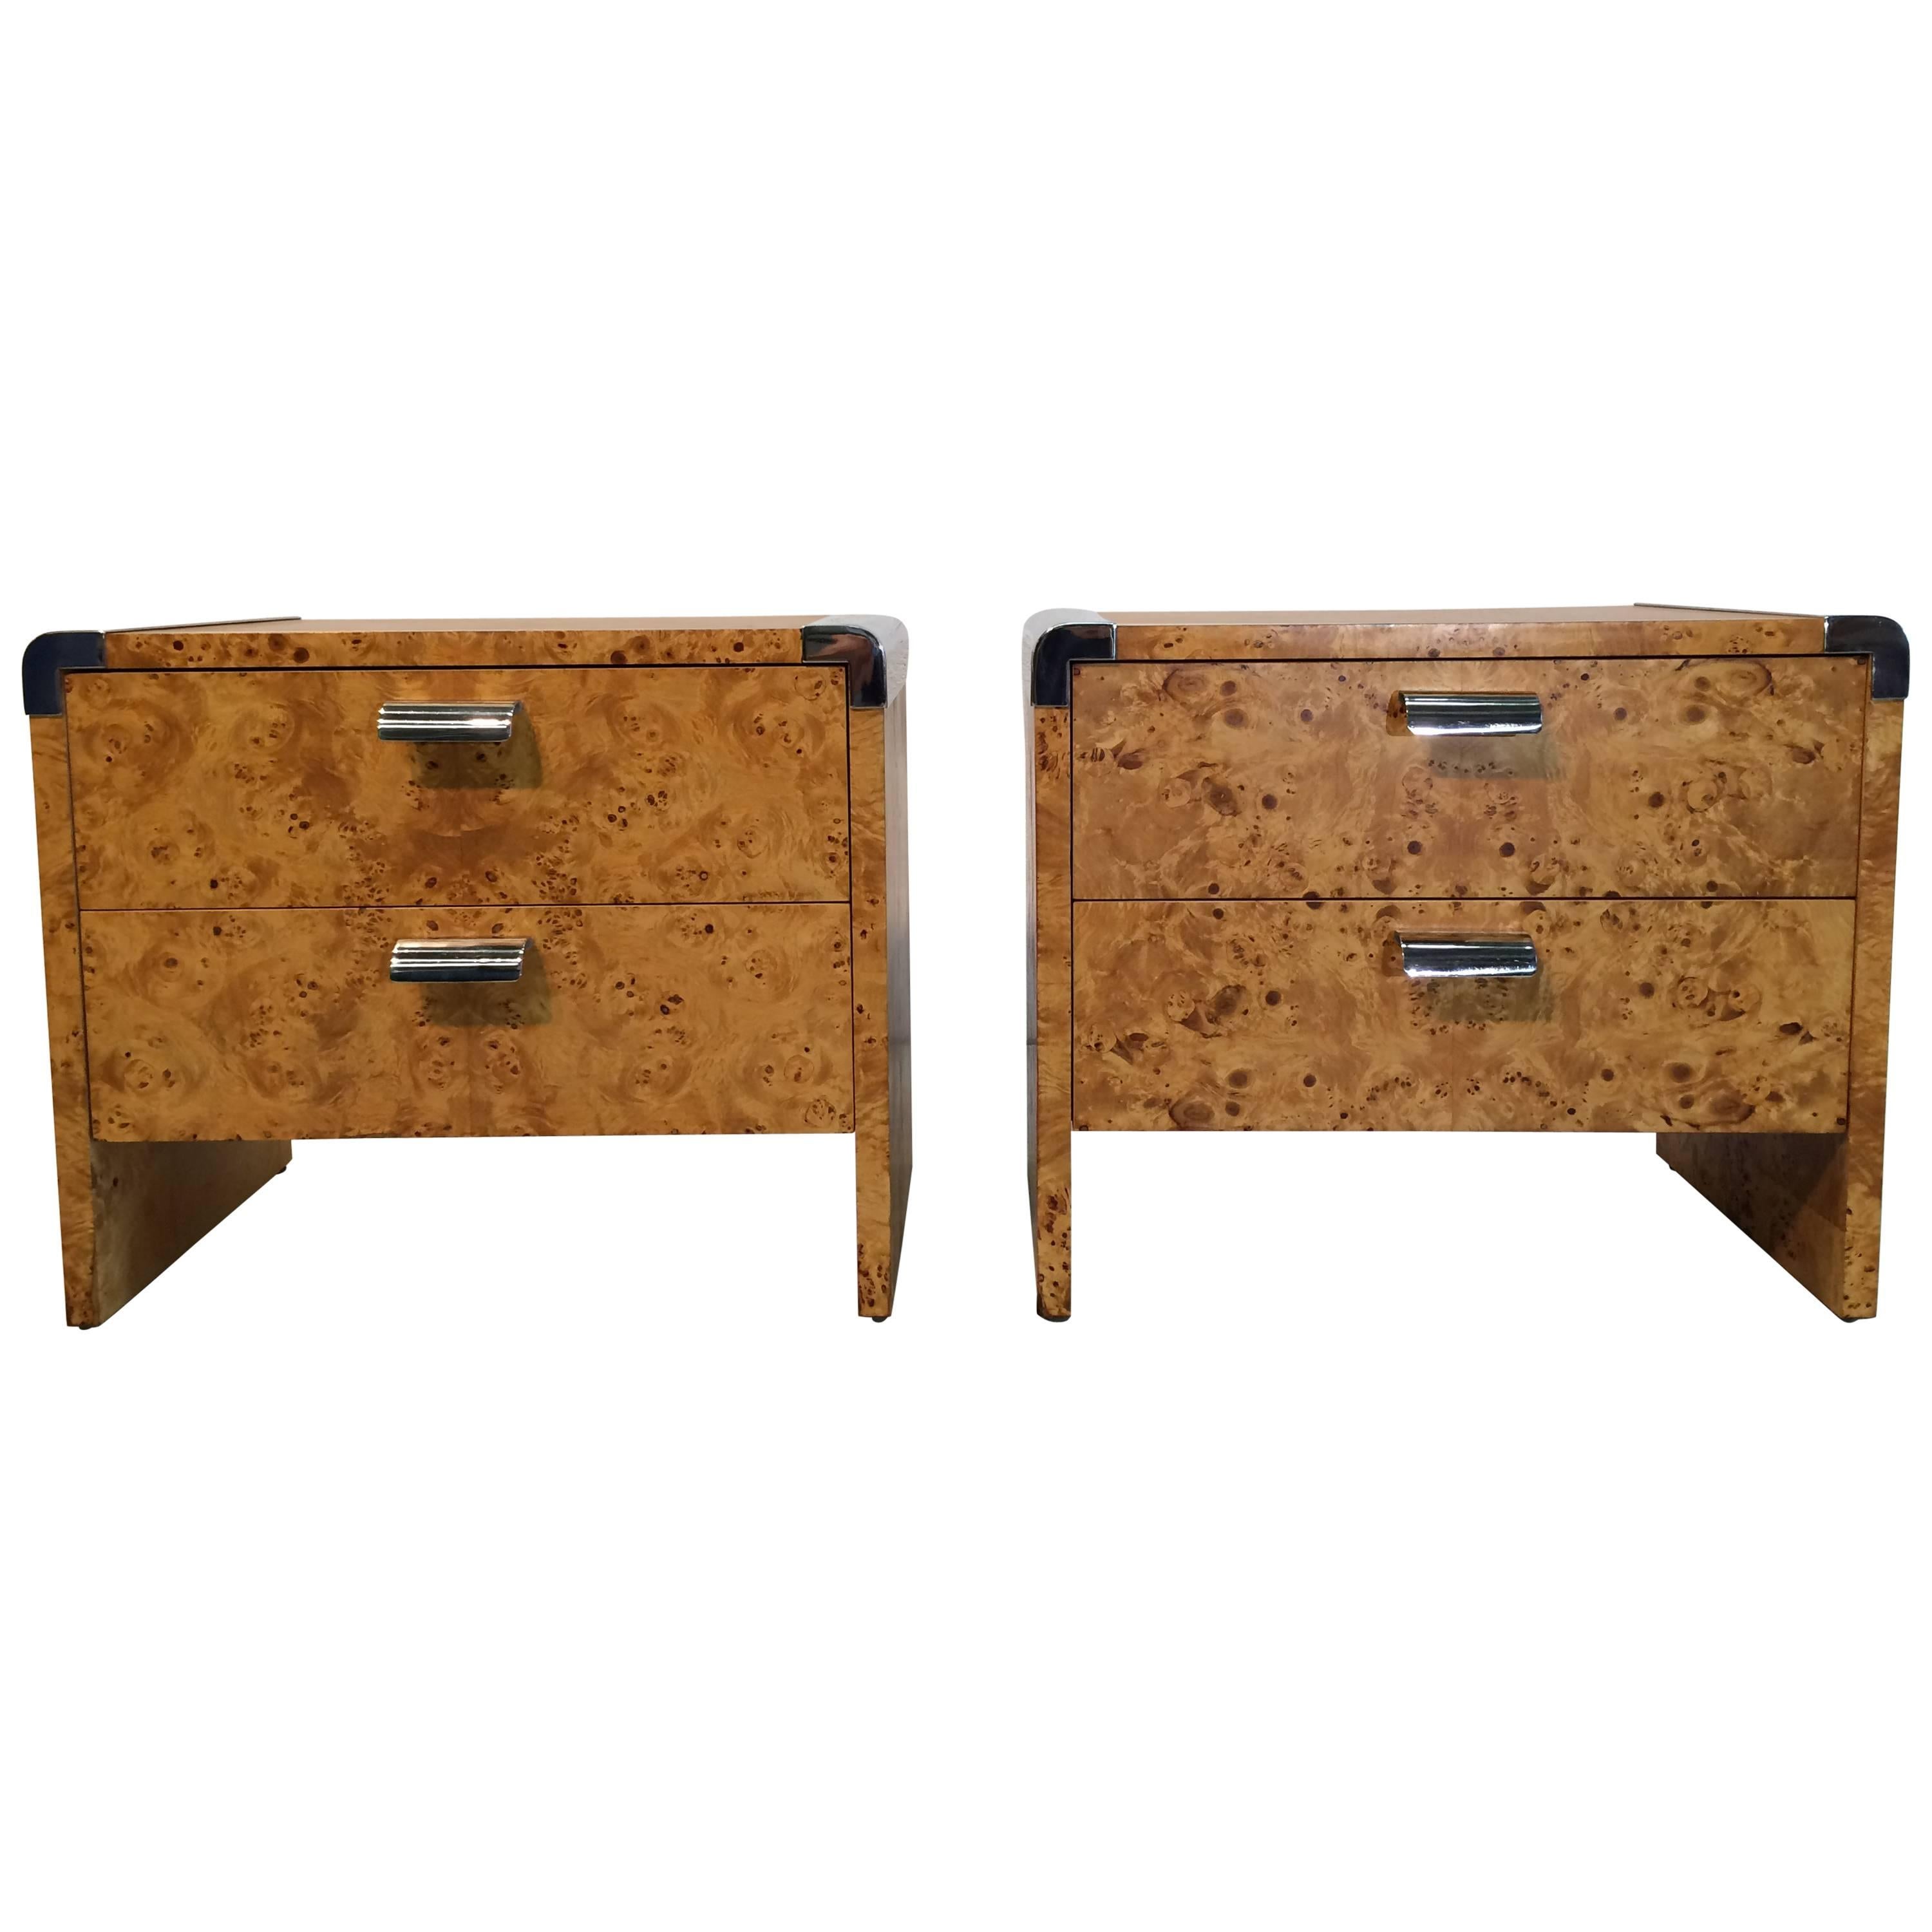 Two Nightstands, Burl and Stainless Steel, USA, 1970s